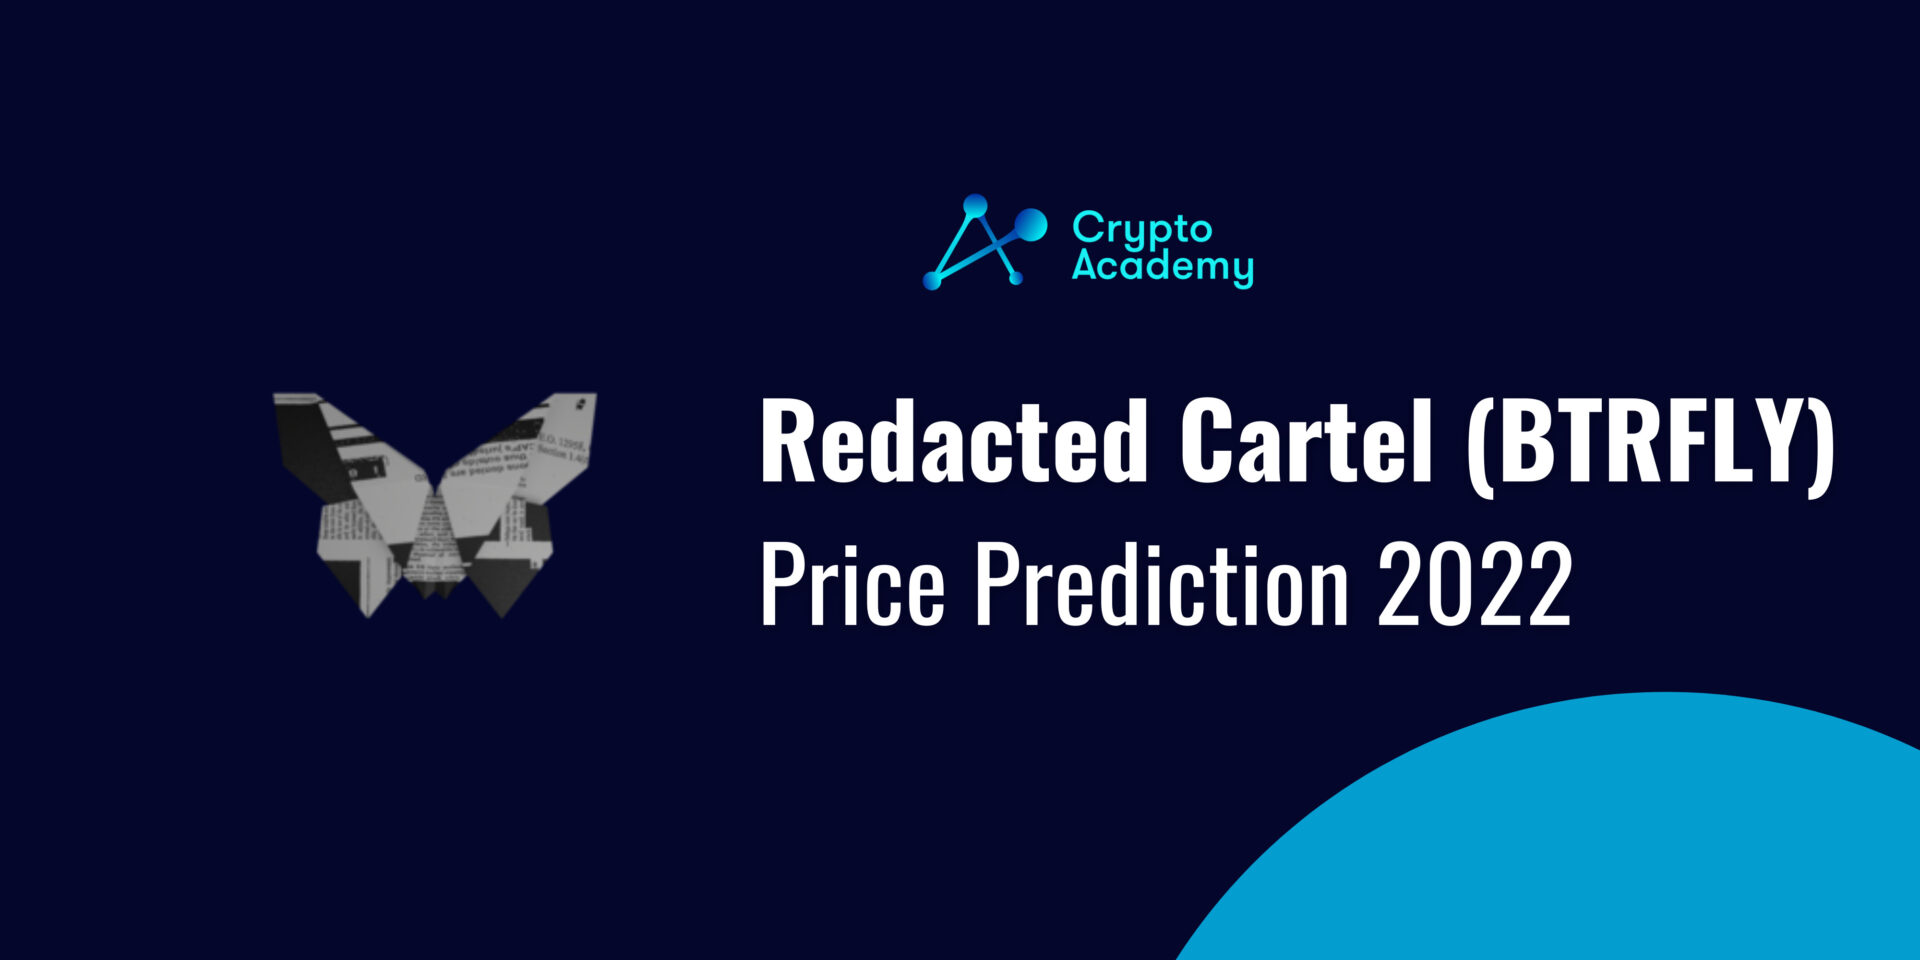 Redacted Cartel Price Prediction 2022 and Beyond - Can BTRFLY Reach $10,000?